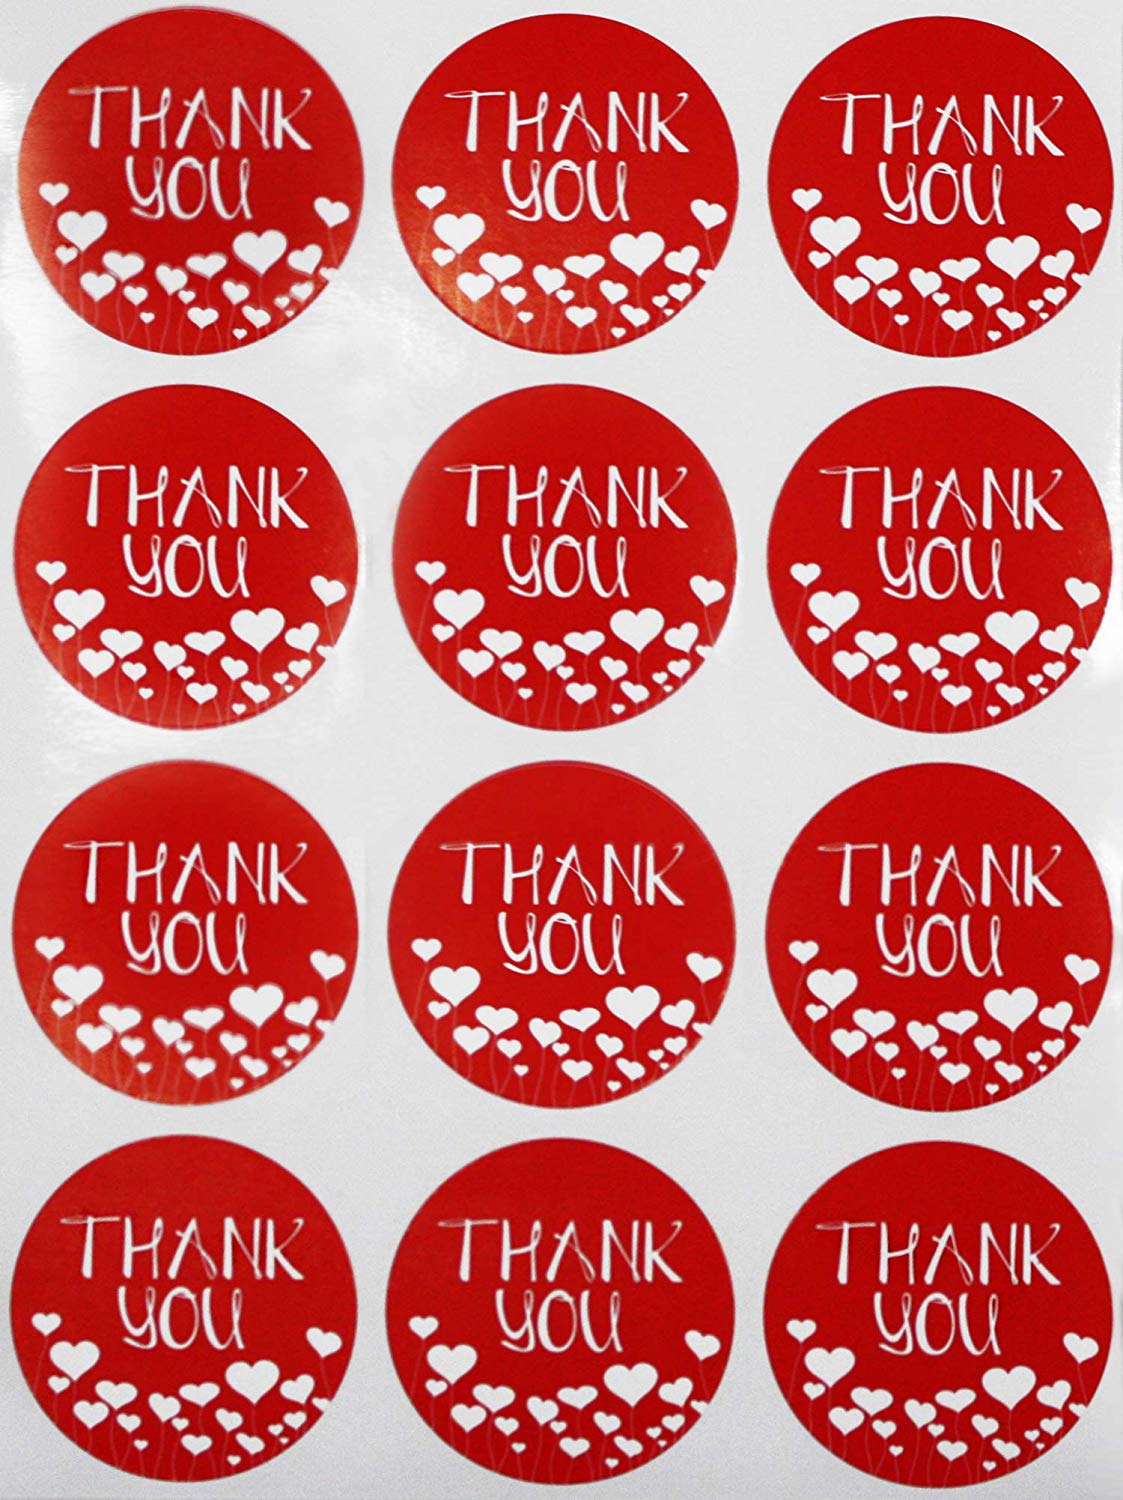 Thank You Heart Stickers, Hearts Shape Stickers